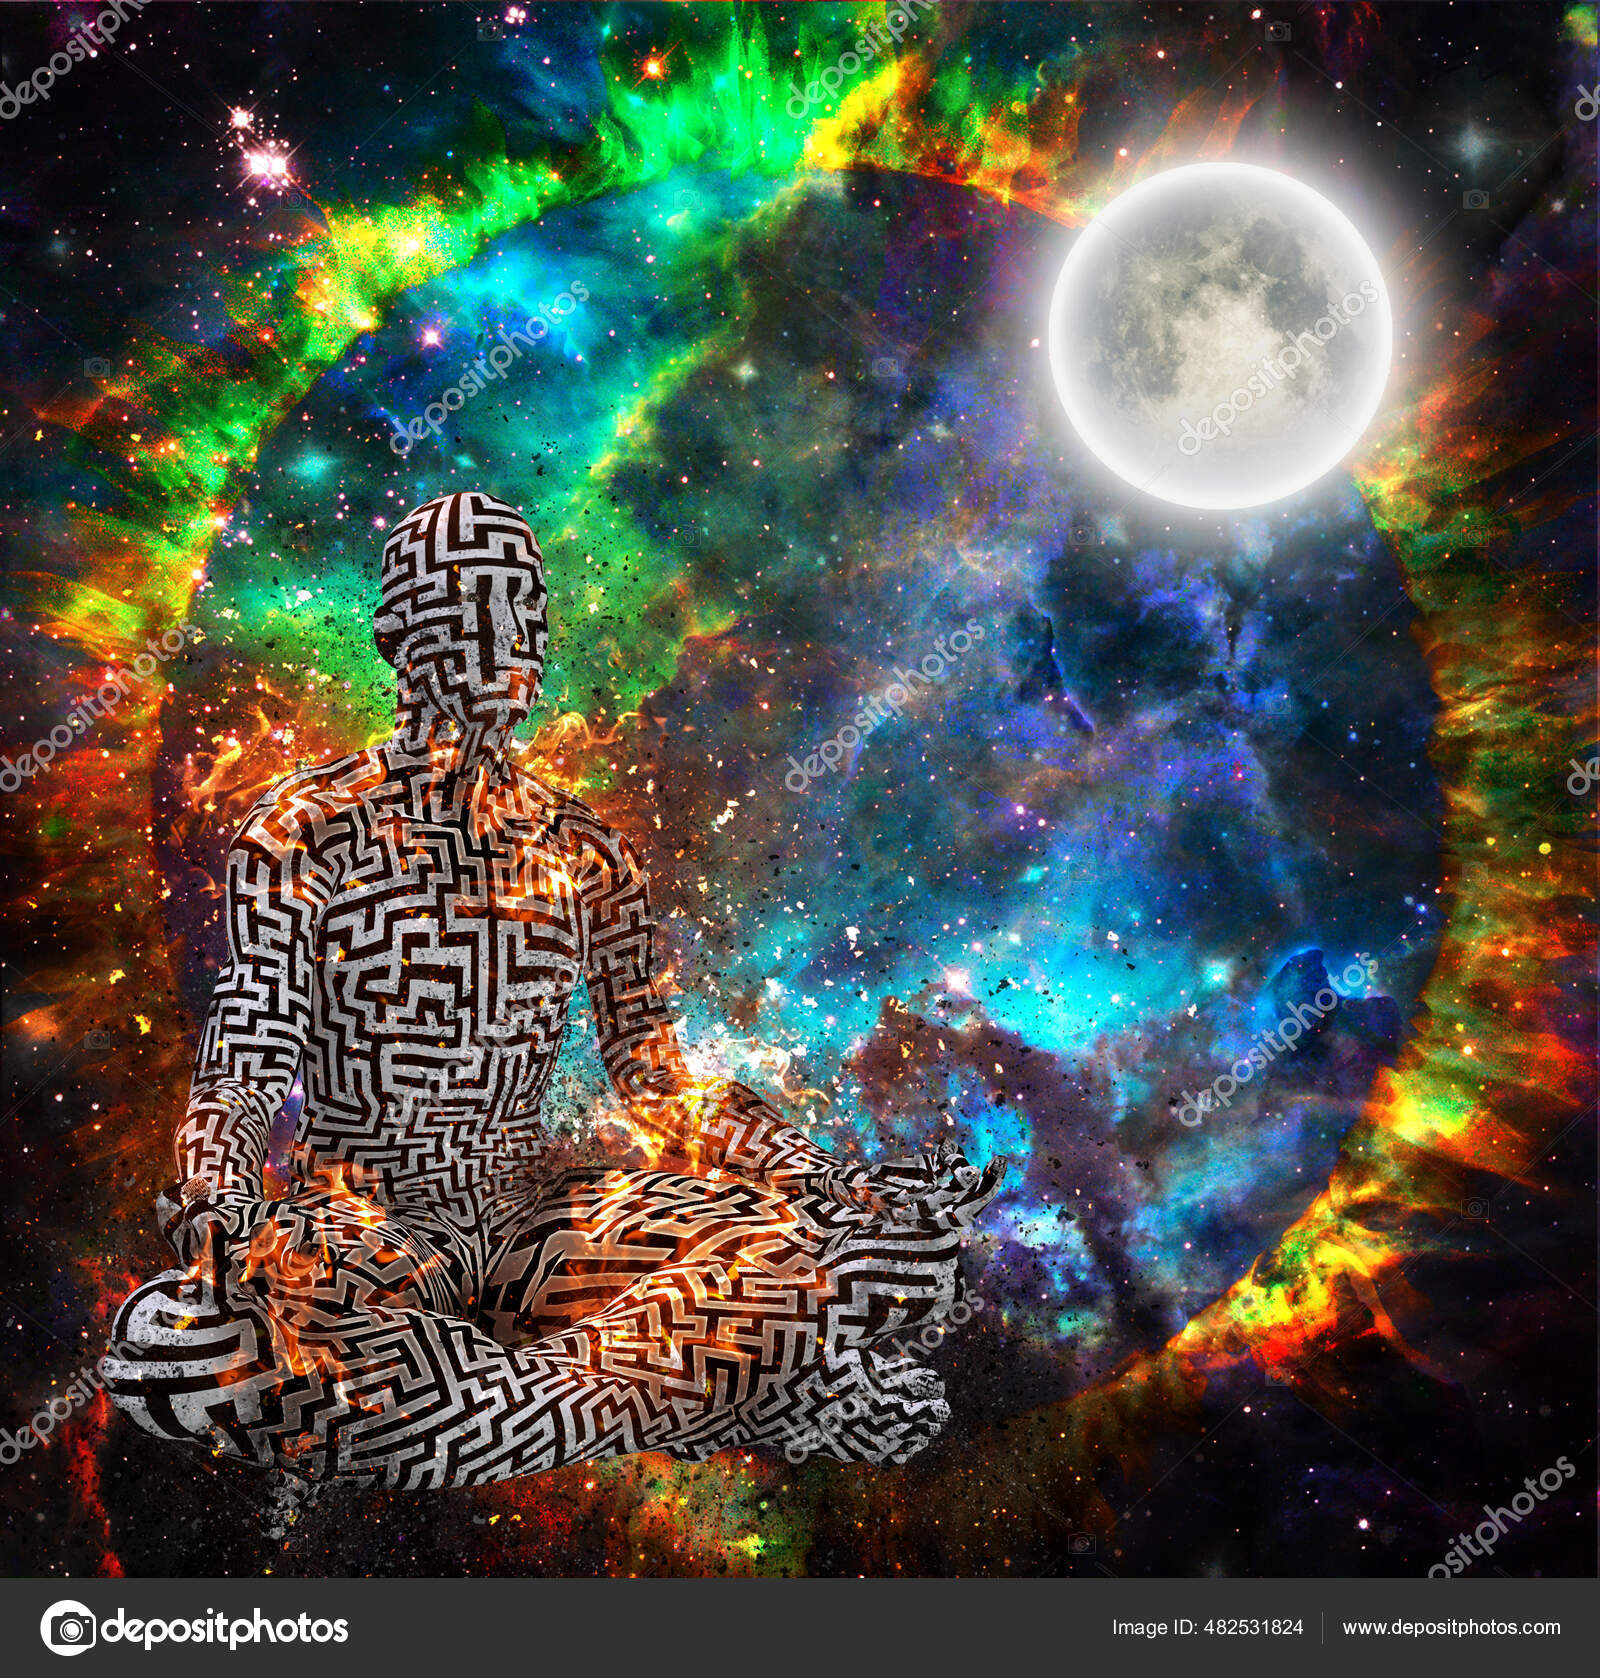 trippy outer space backgrounds